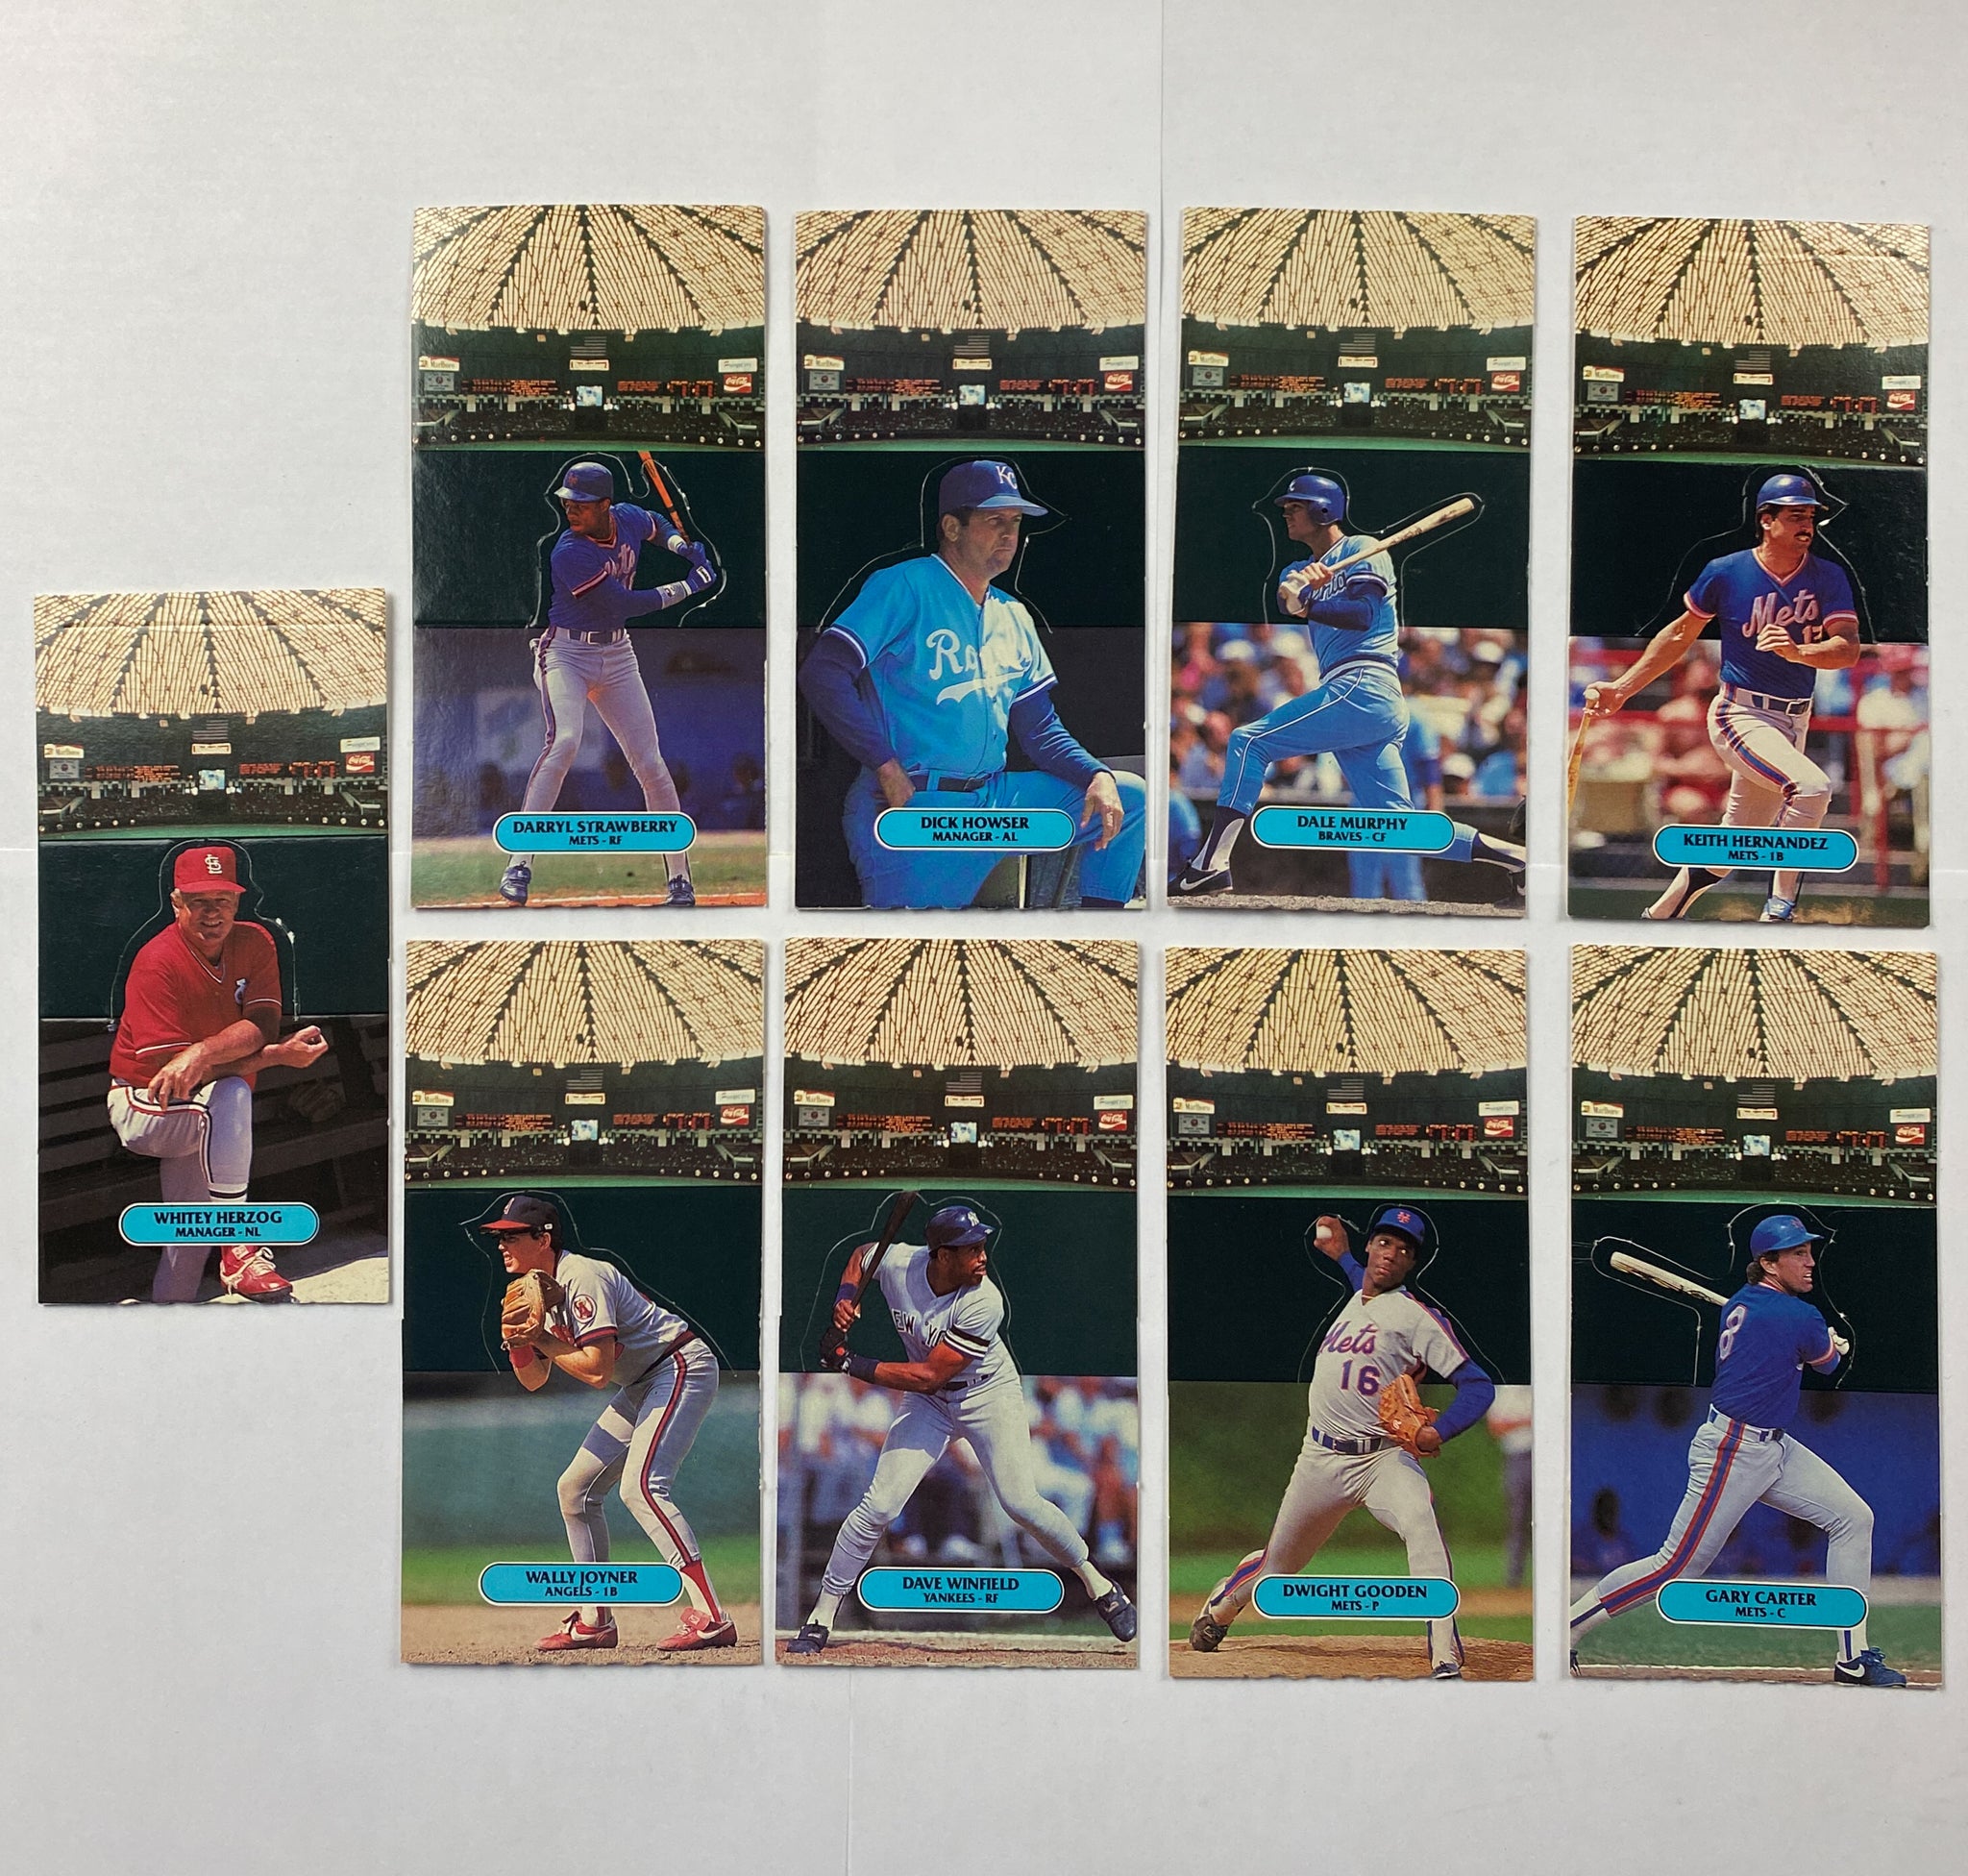 1986 Leaf Baseball Allstar Game Pop Out Stand Up Card Lot of 9